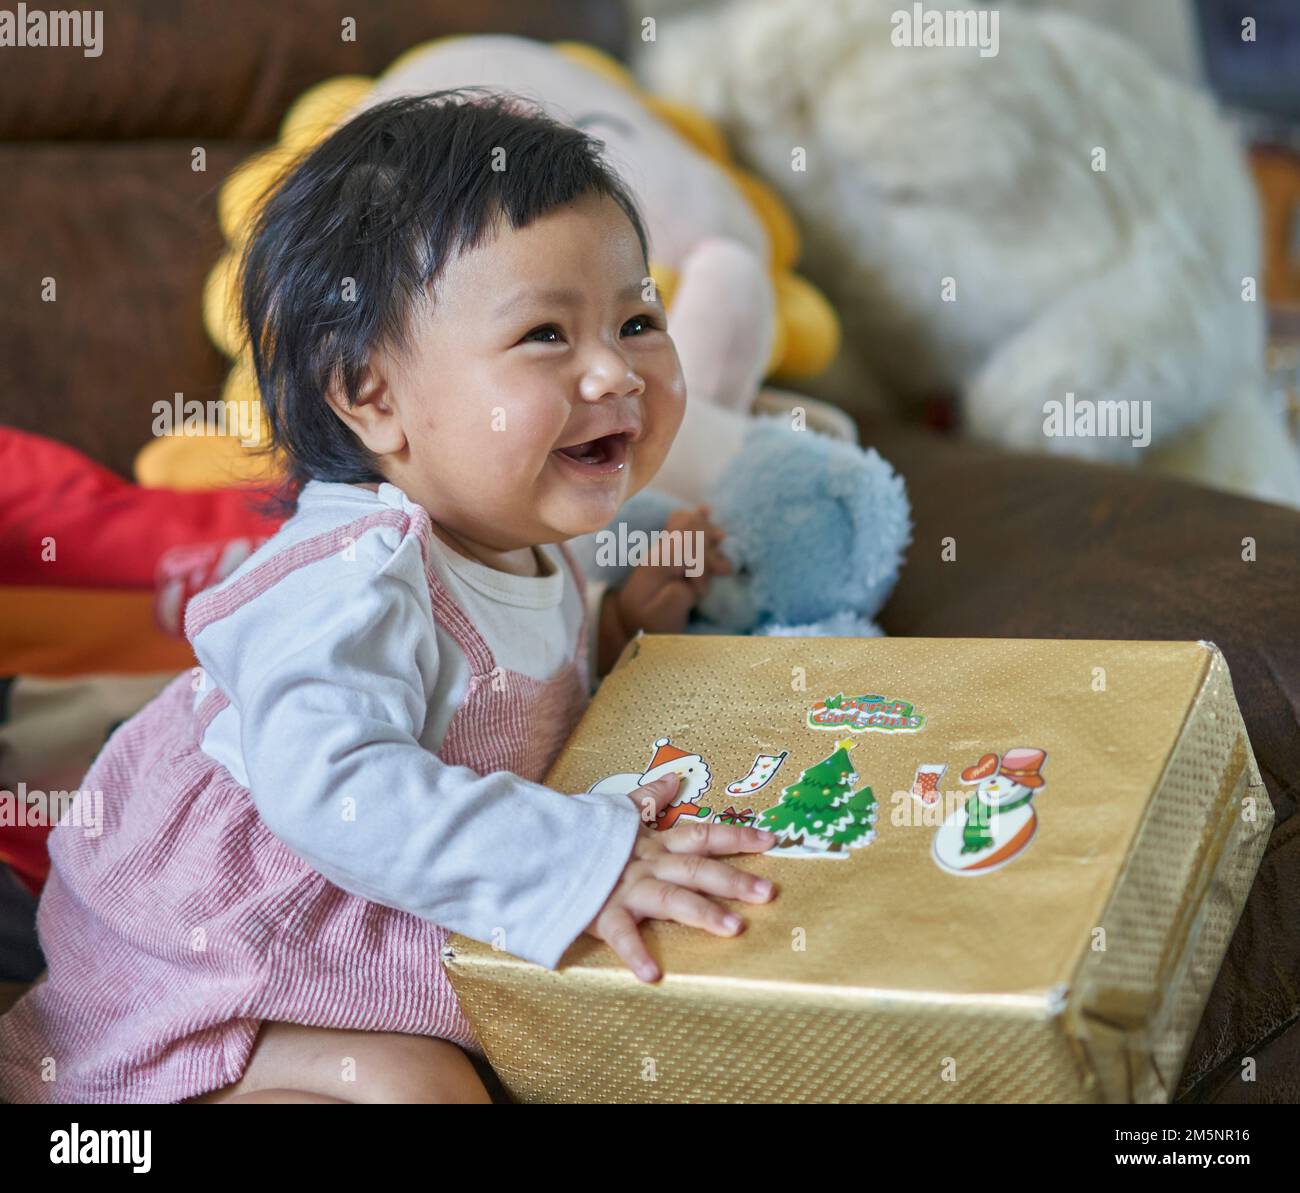 A small happy baby receives her first Christmas present. Stock Photo